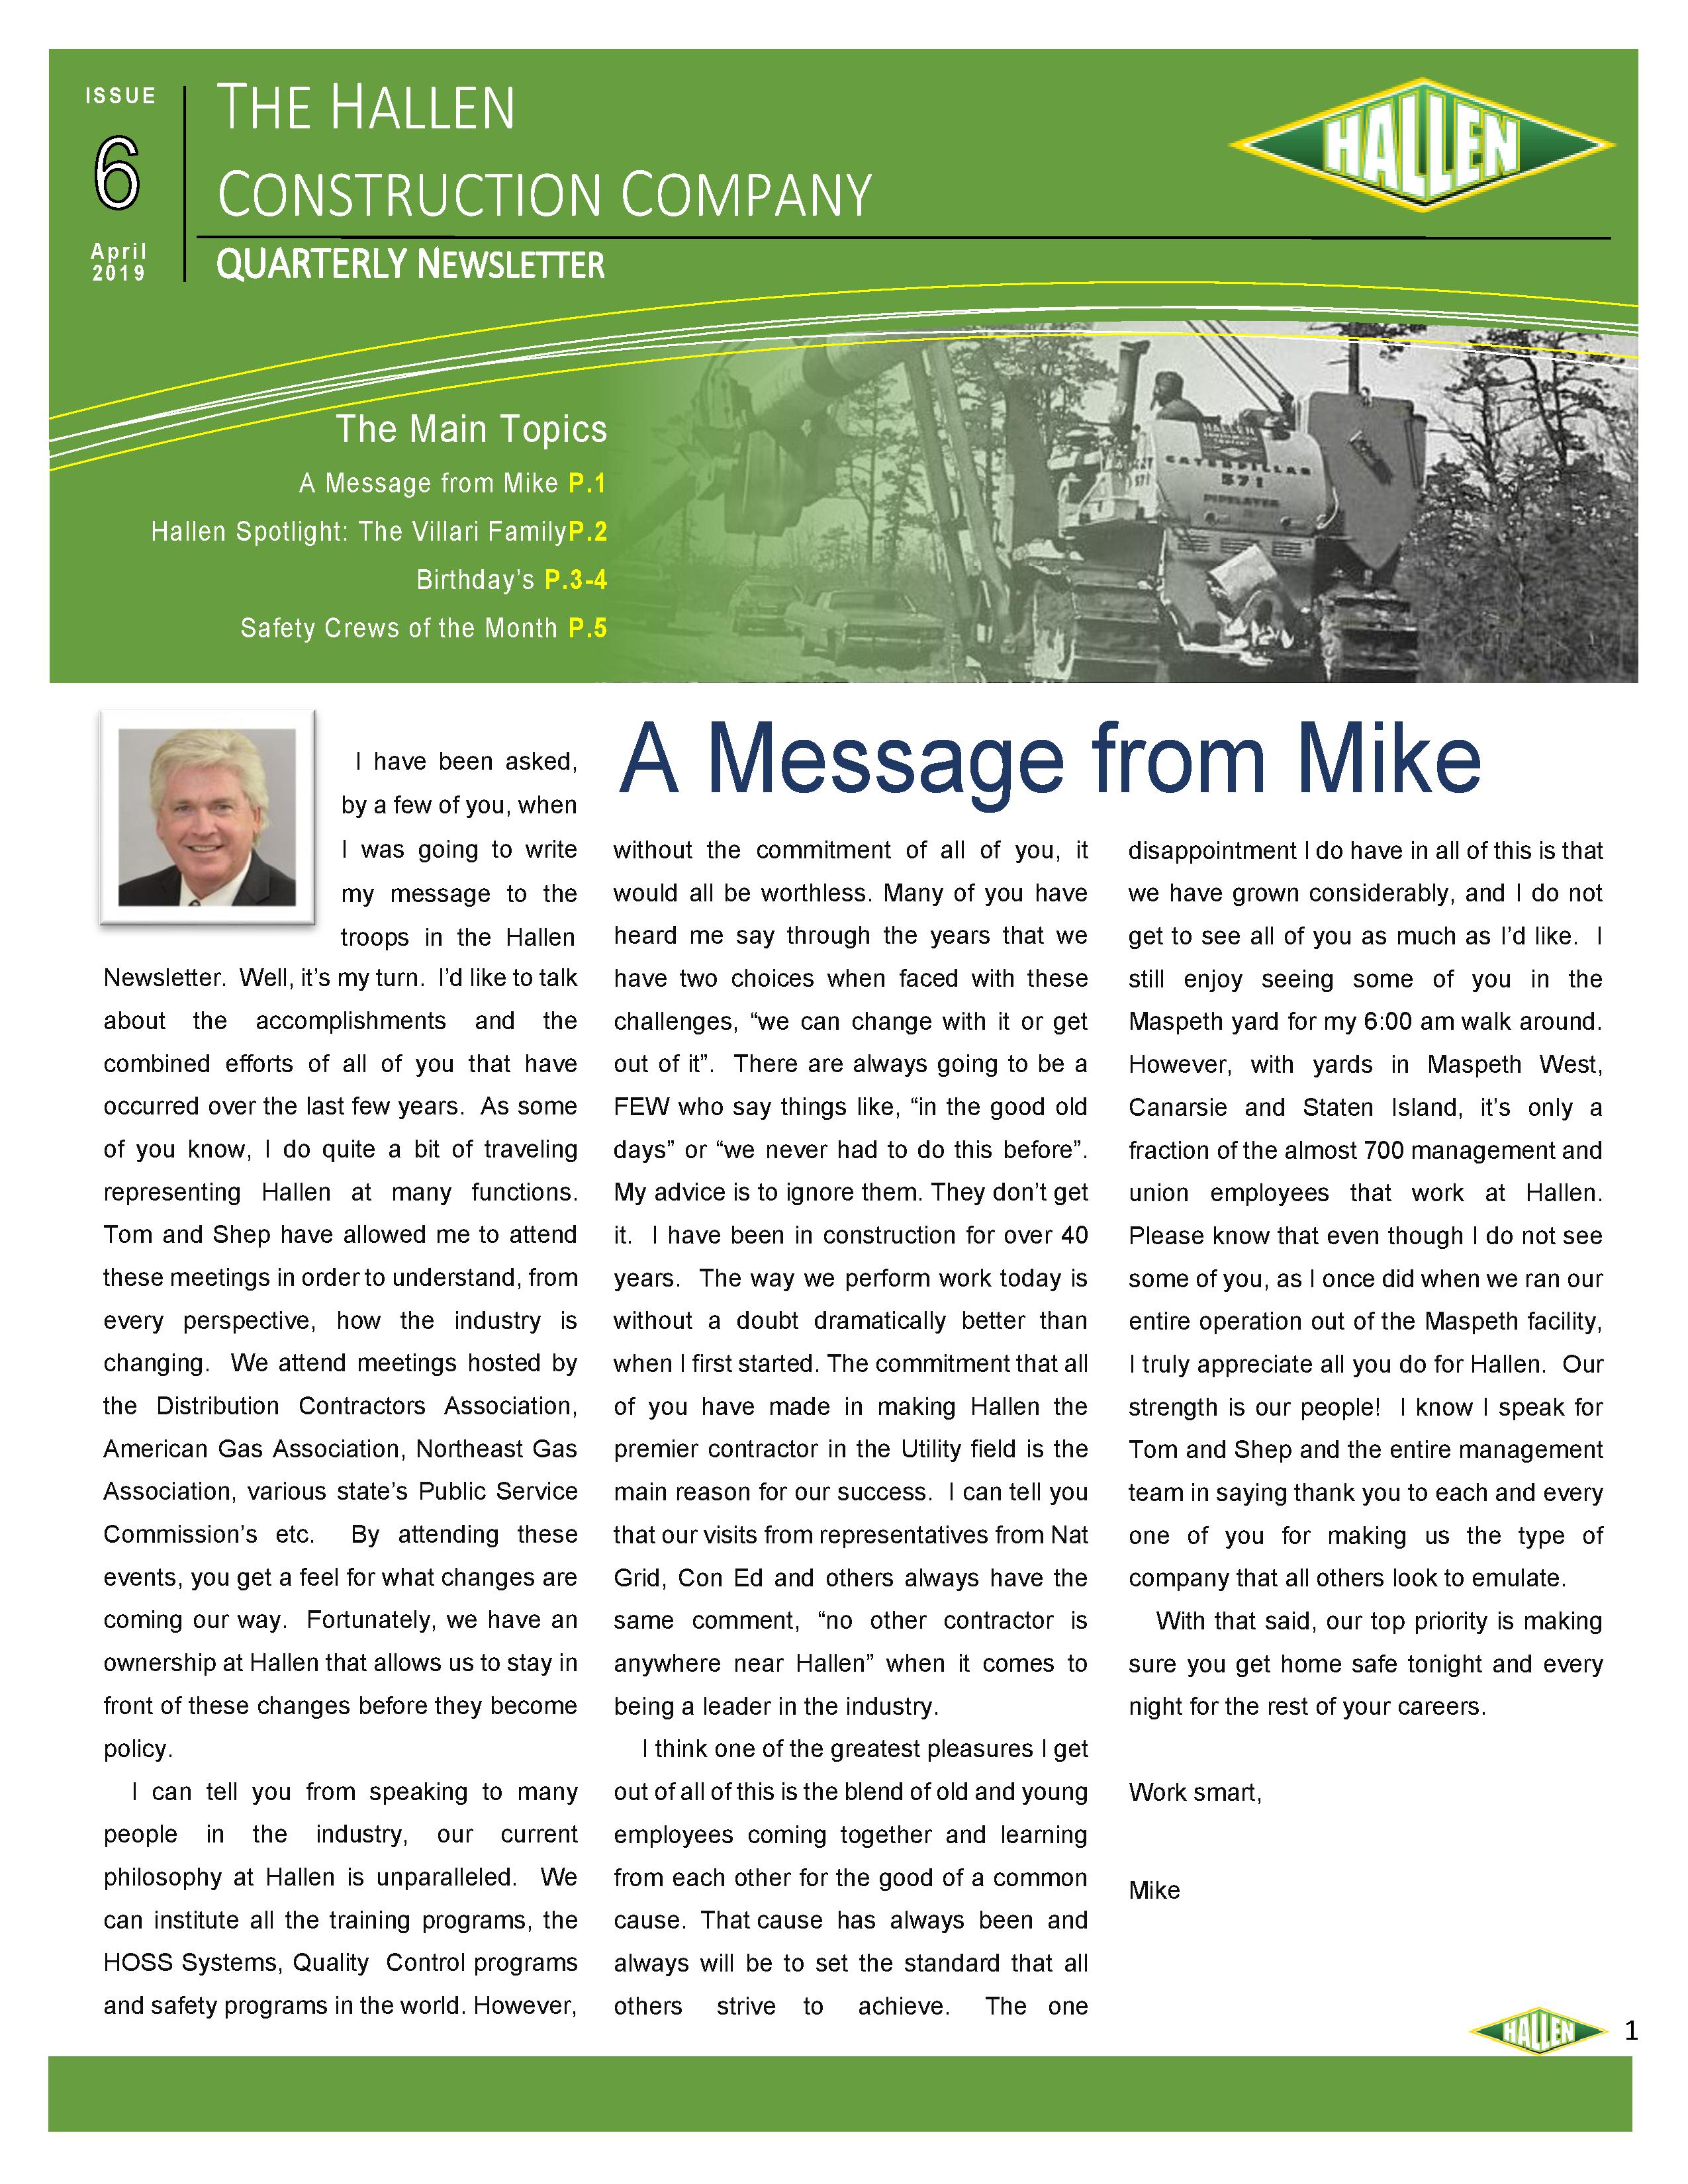 April 2019 Company Newsletter Page 1